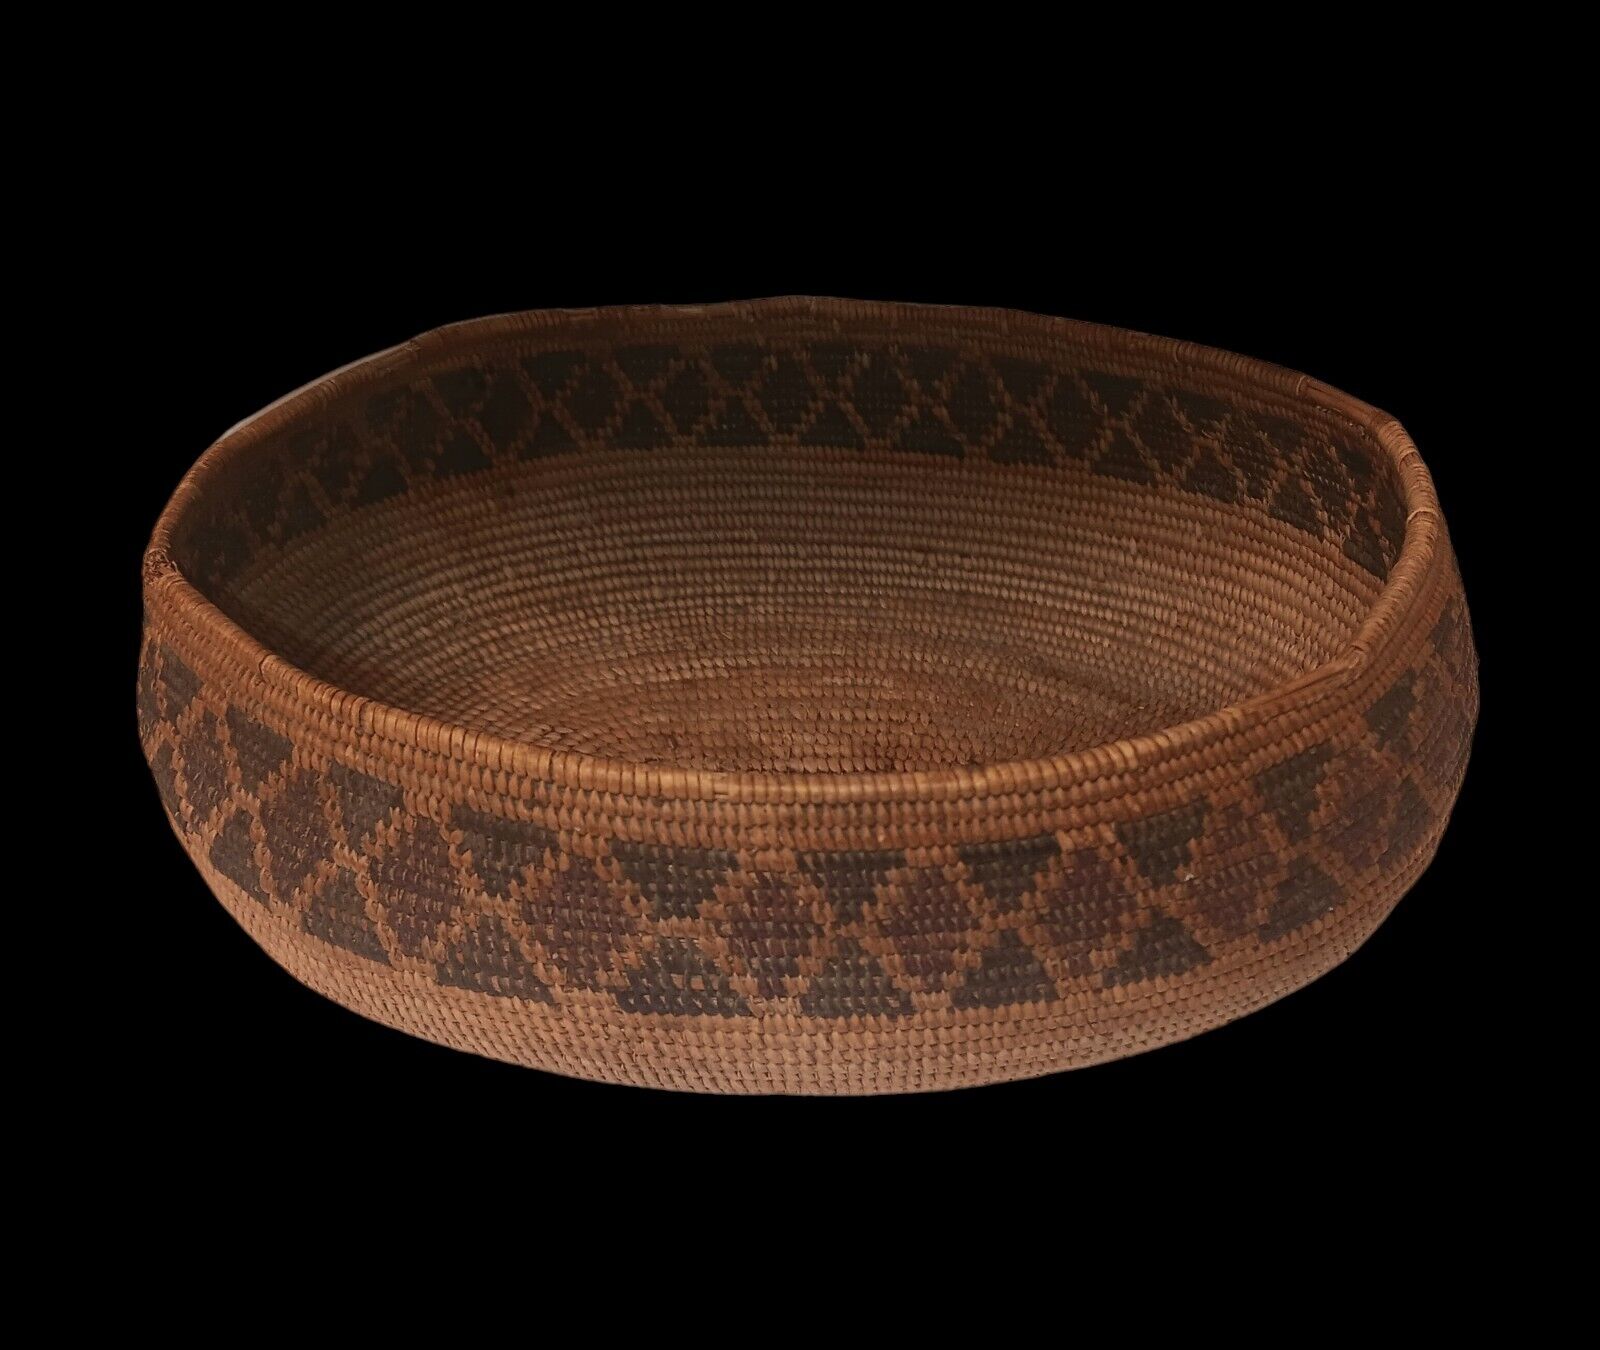 Antique Native American Coil Weave Oval basket